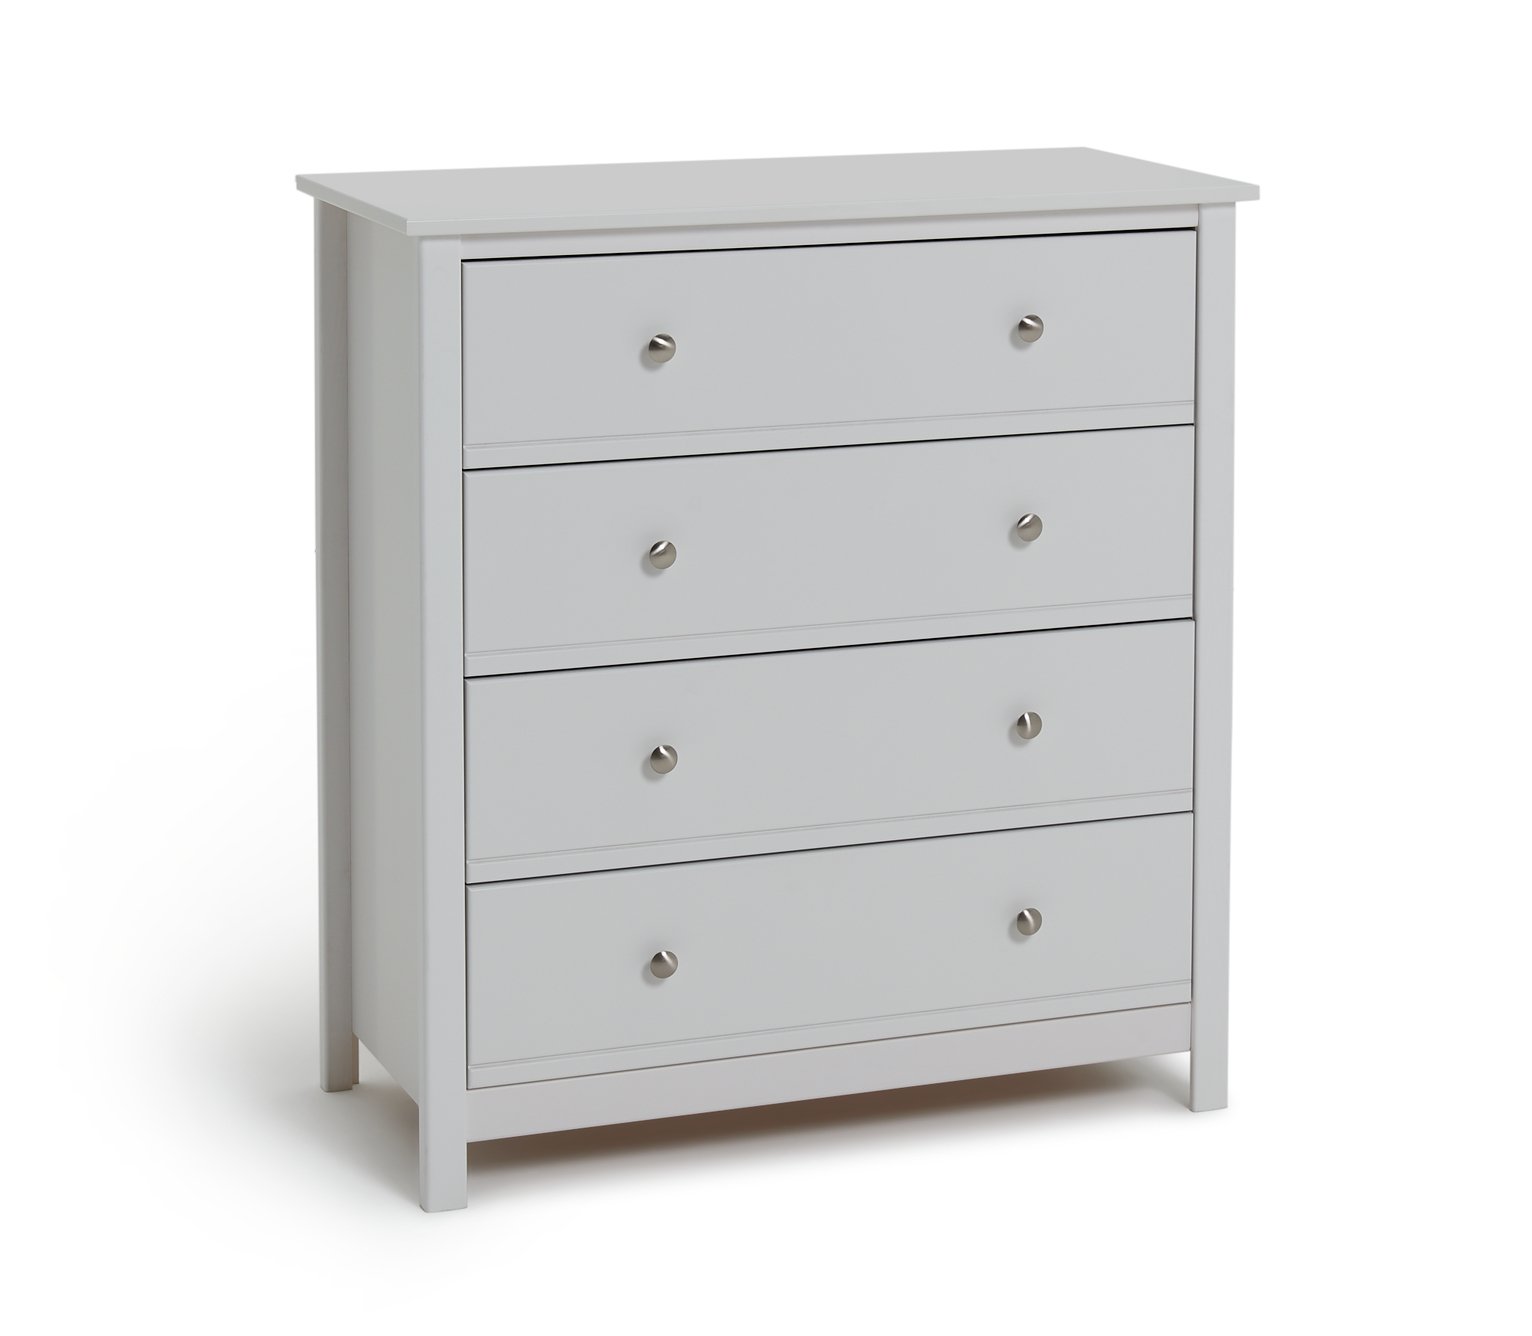 Argos Home Brooklyn White 4 Chest of Drawers review